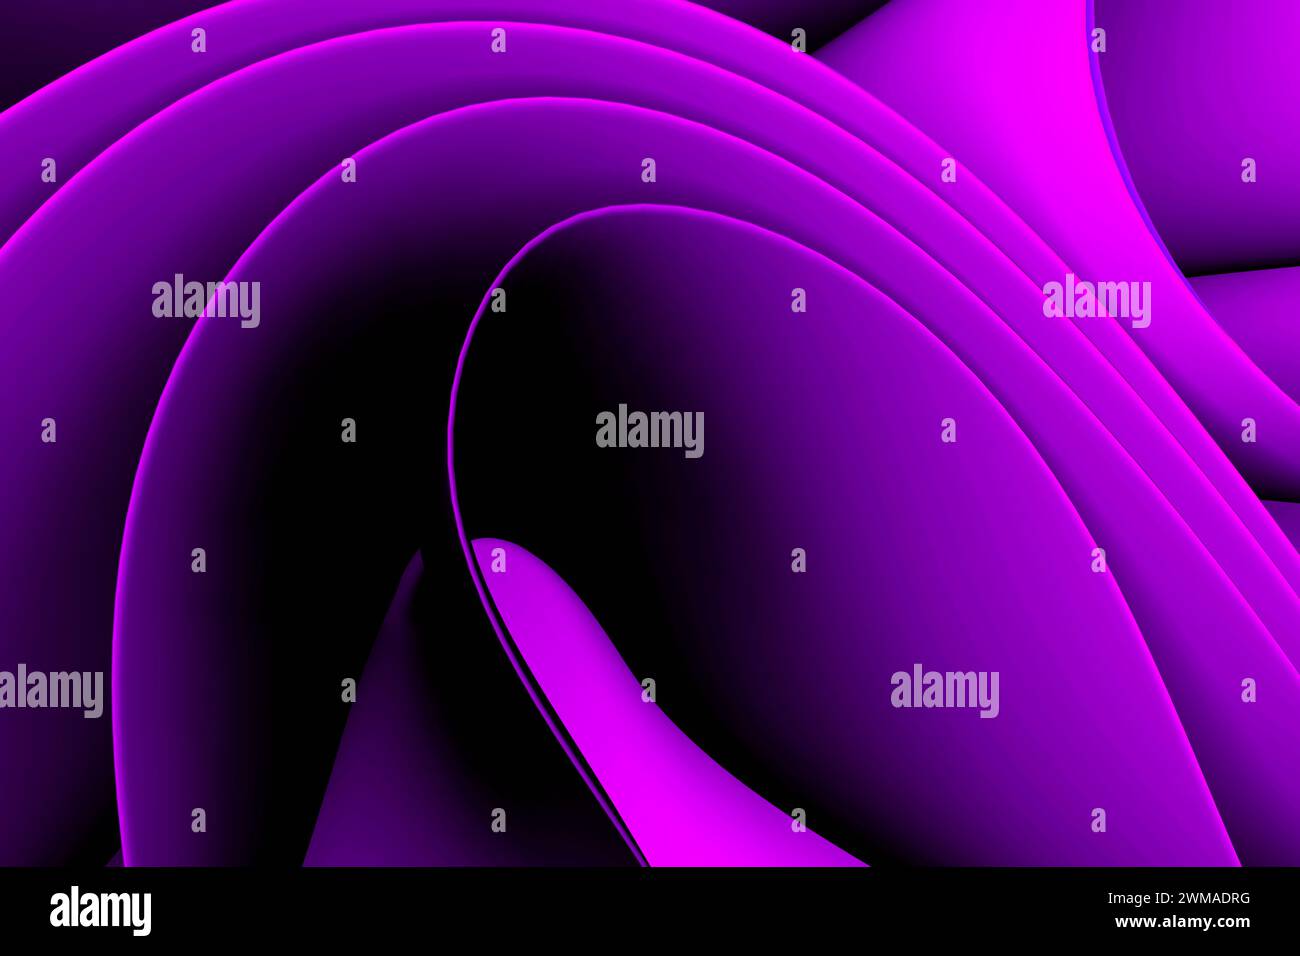 Purple color Line curve abstract Stock Photo